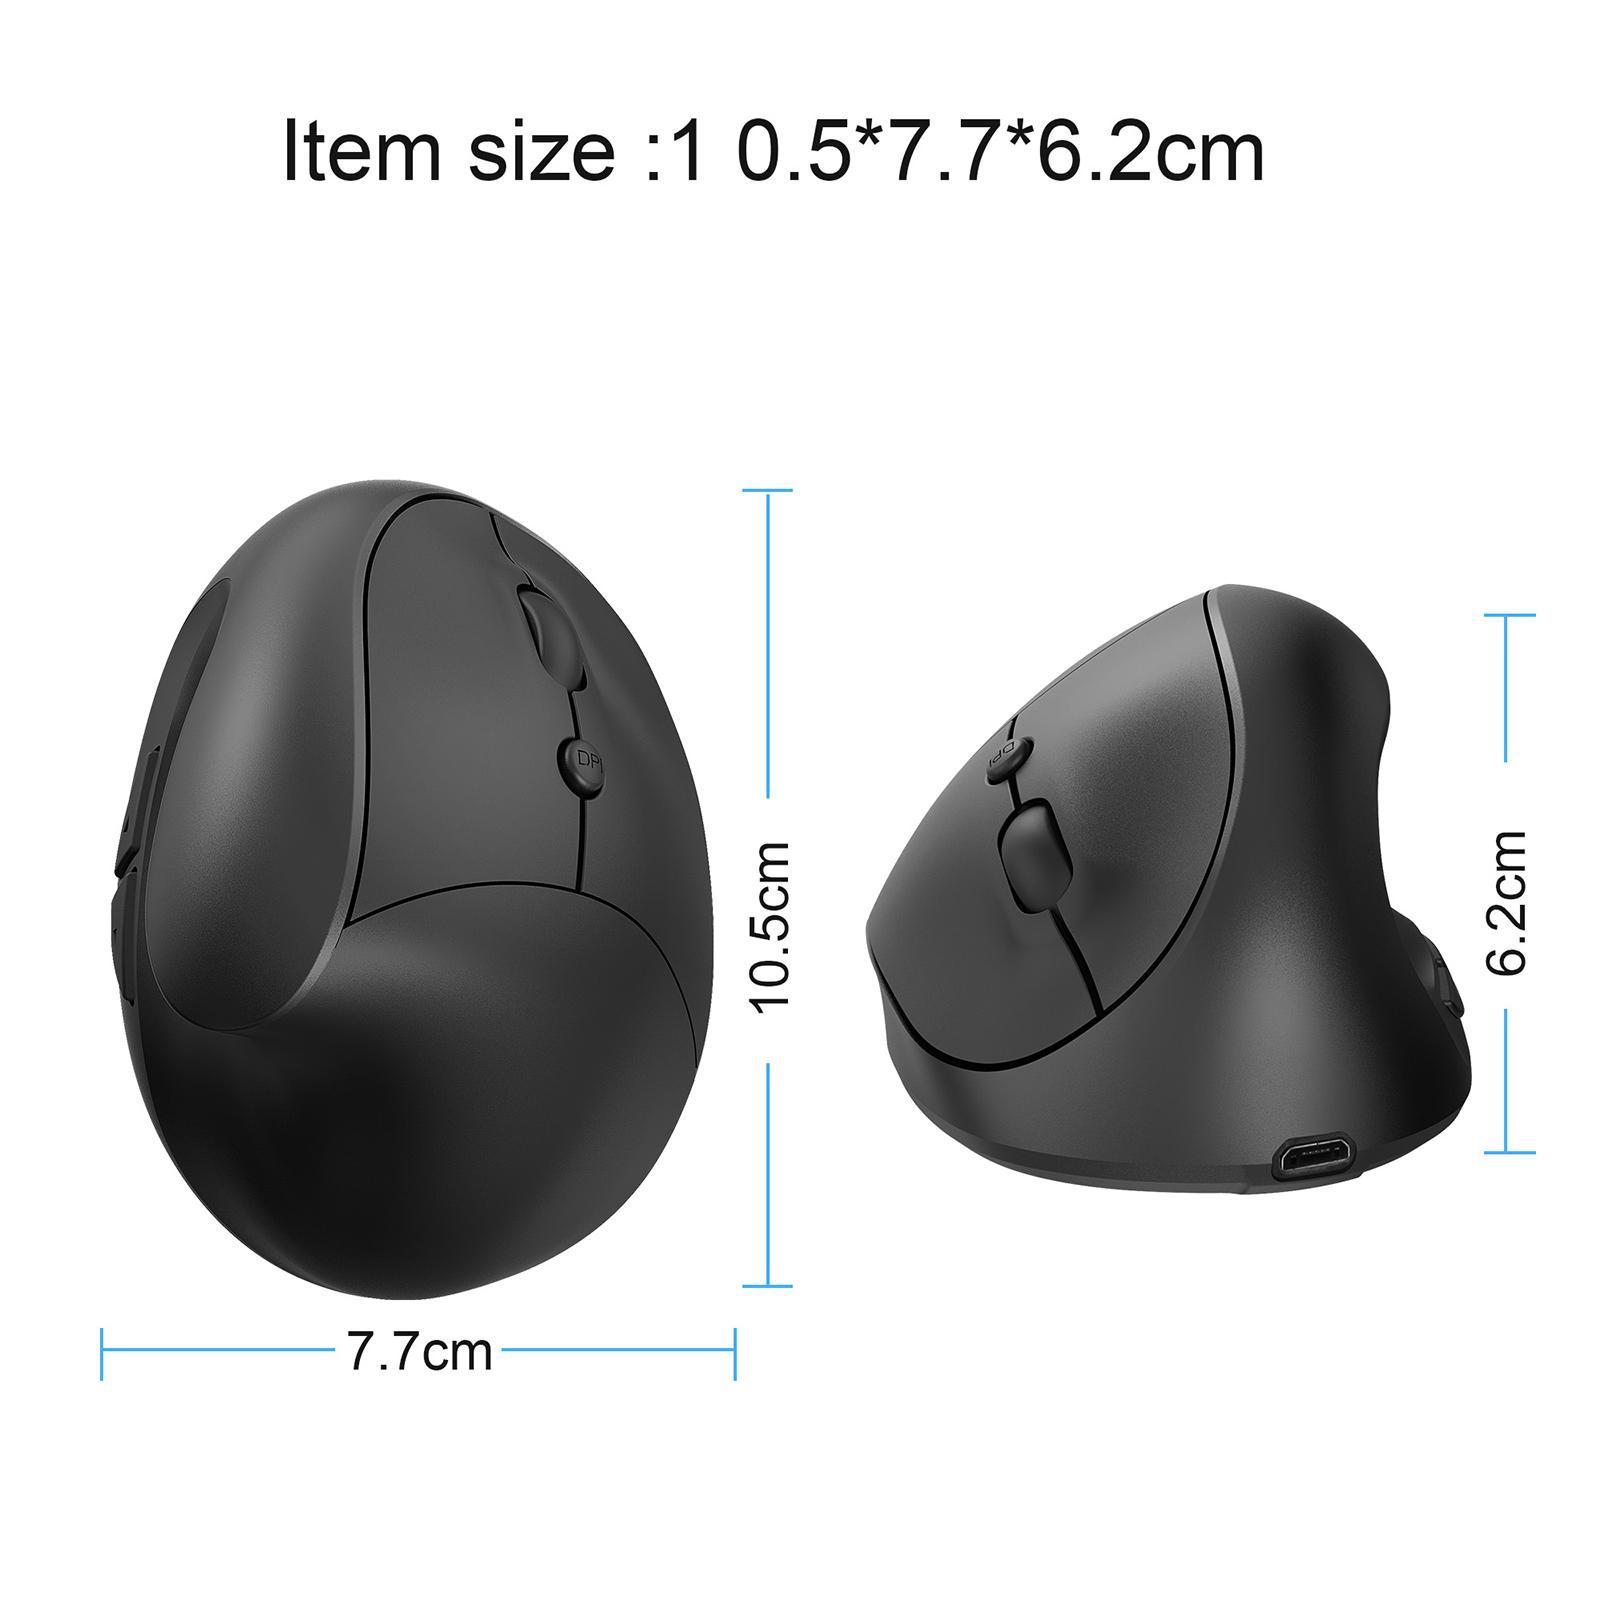 Ergonomic Mouse 2.4GHz Optical Vertical Mice Rechargeable for Gamers